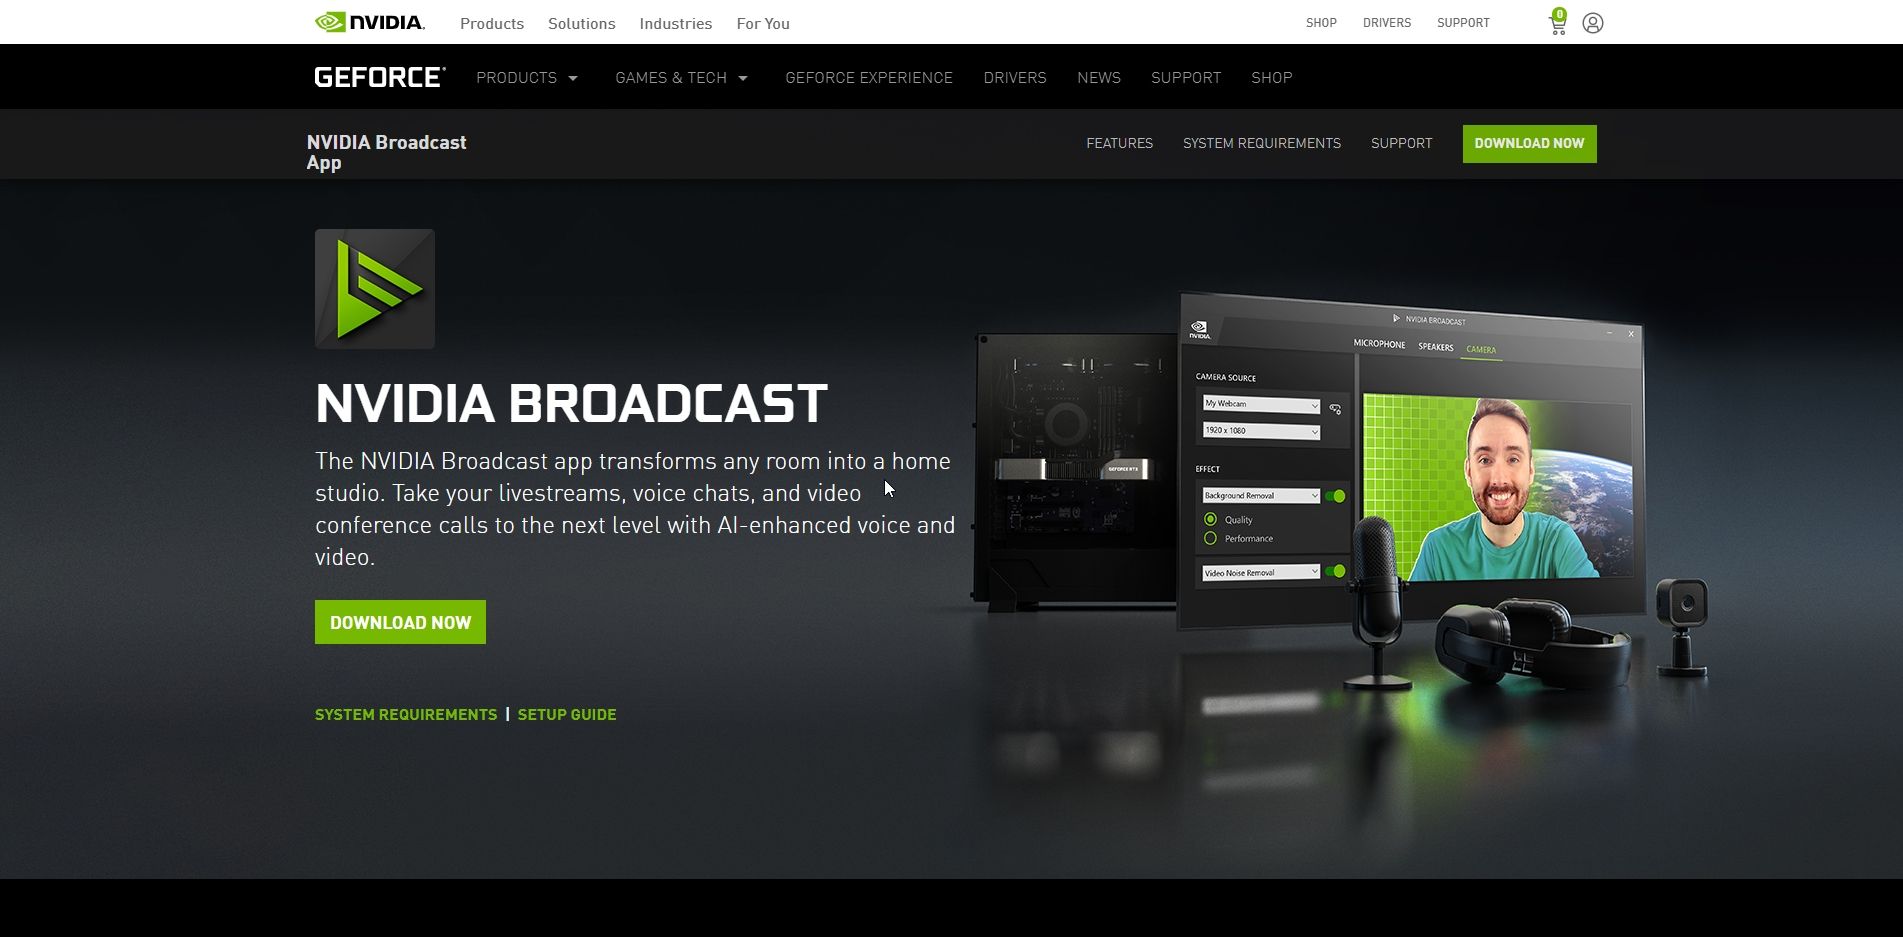 NVIDIA Broadcast download page